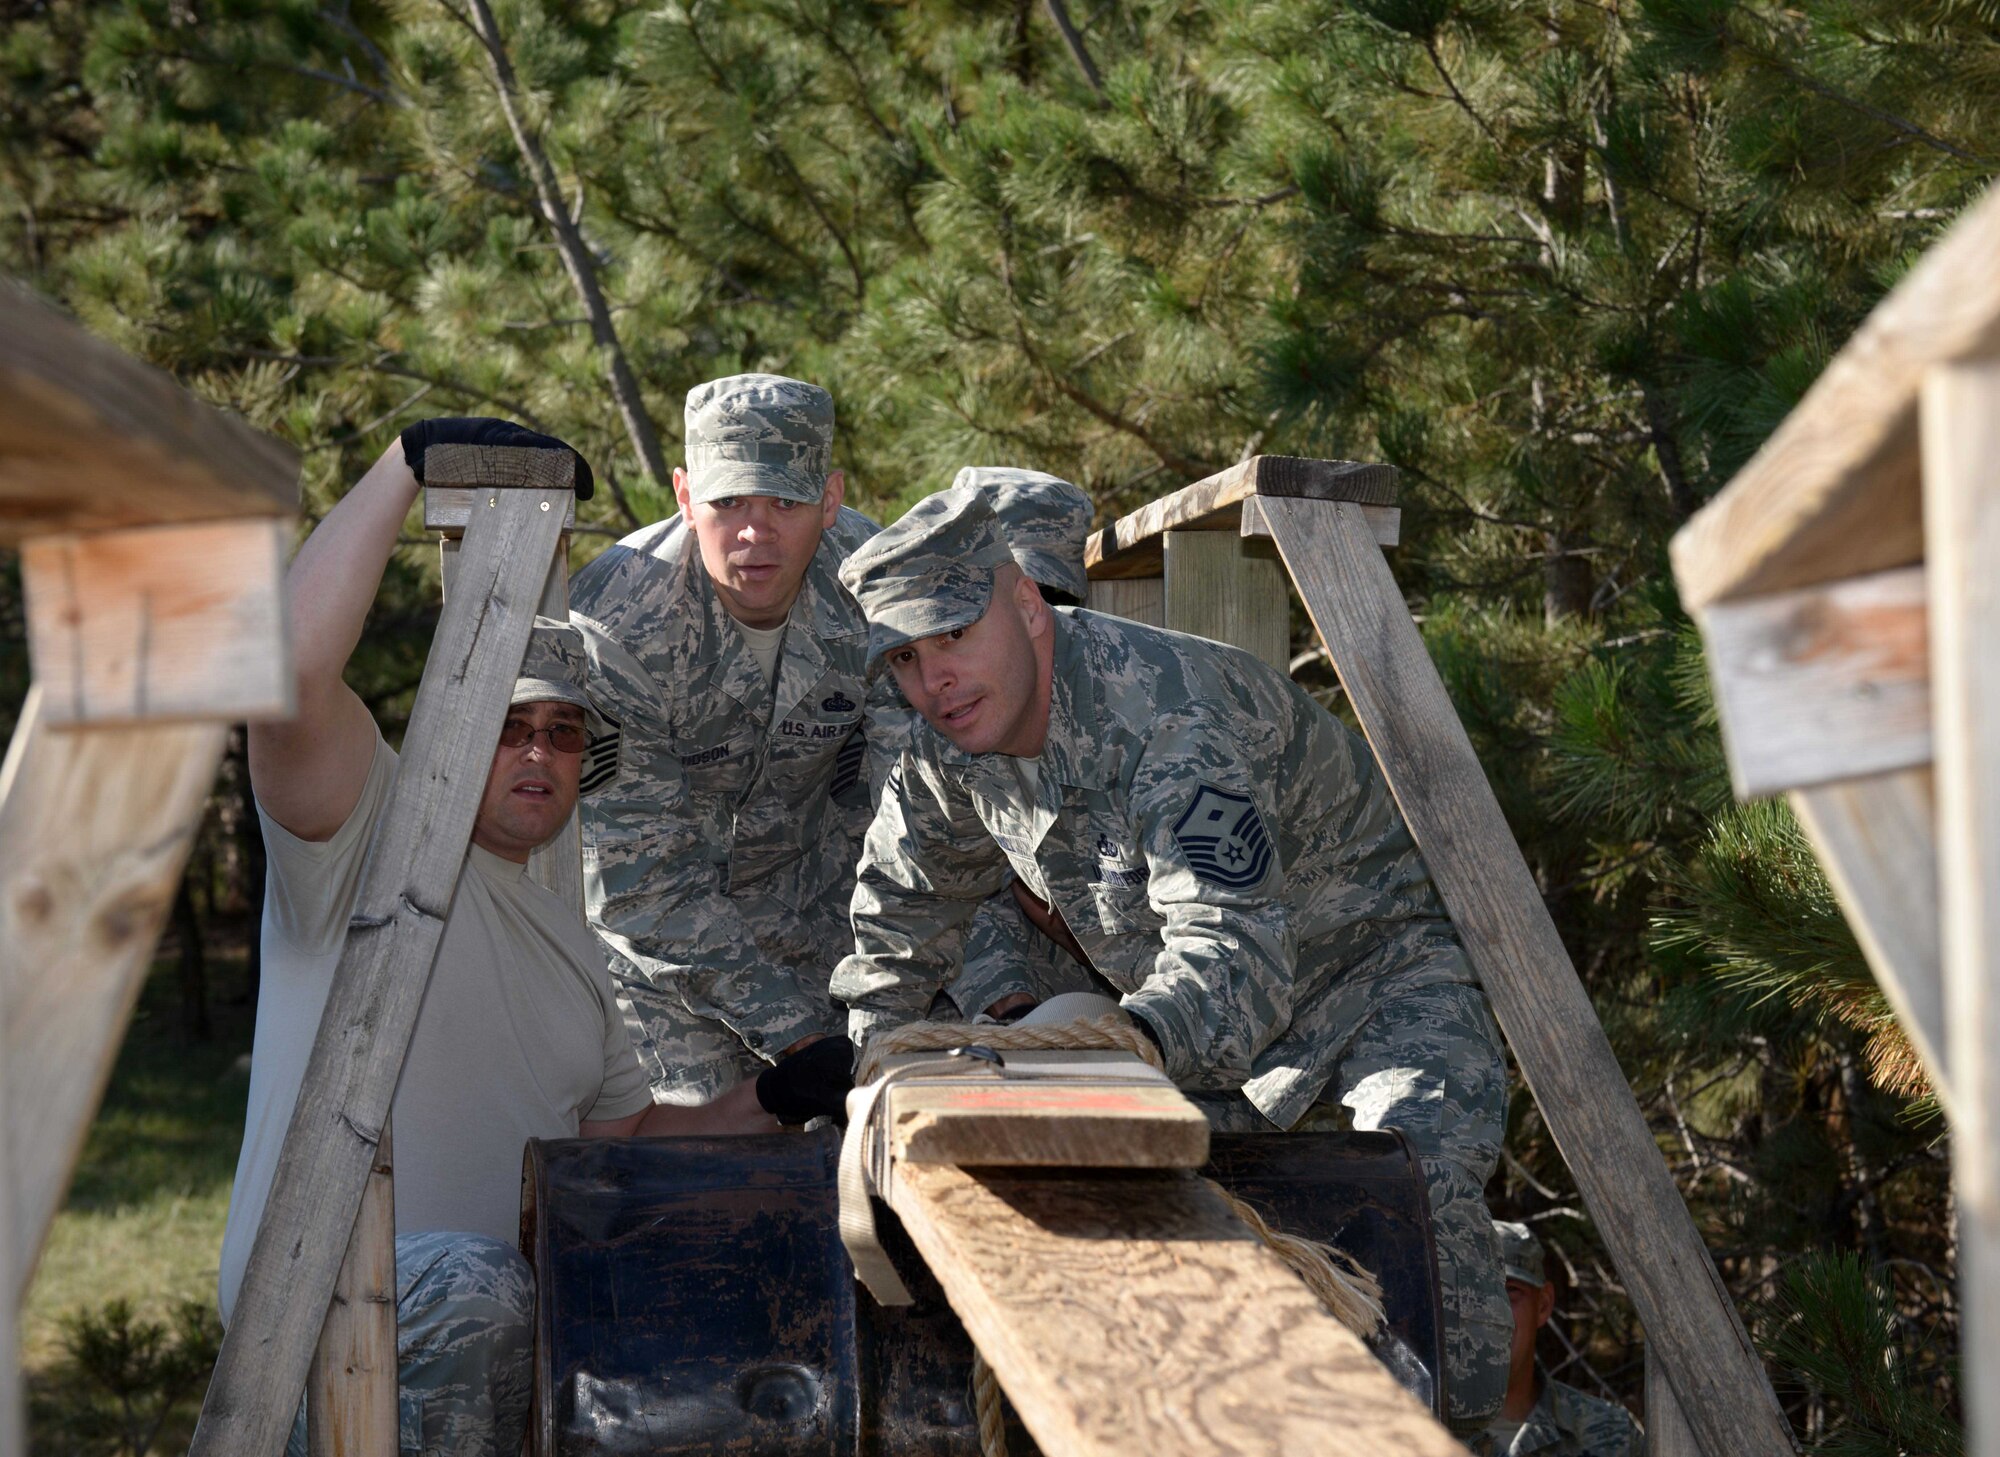 Master Sgt. Paul Lanoue, left, Master Sgt. Christopher Davidson, center, and Master Sgt. Patrick Hill, right, first sergeants at Ellsworth Air Force Base, S.D., assemble a makeshift bridge during the Leadership Reaction Course at the South Dakota National Guard West Camp Rapid training facility, Rapid City, Sept. 15, 2016. Many of the obstacles required swift and creative thinking in order to achieve the given task. (U.S. Air Force photo by Airman 1st Class Donald C. Knechtel)